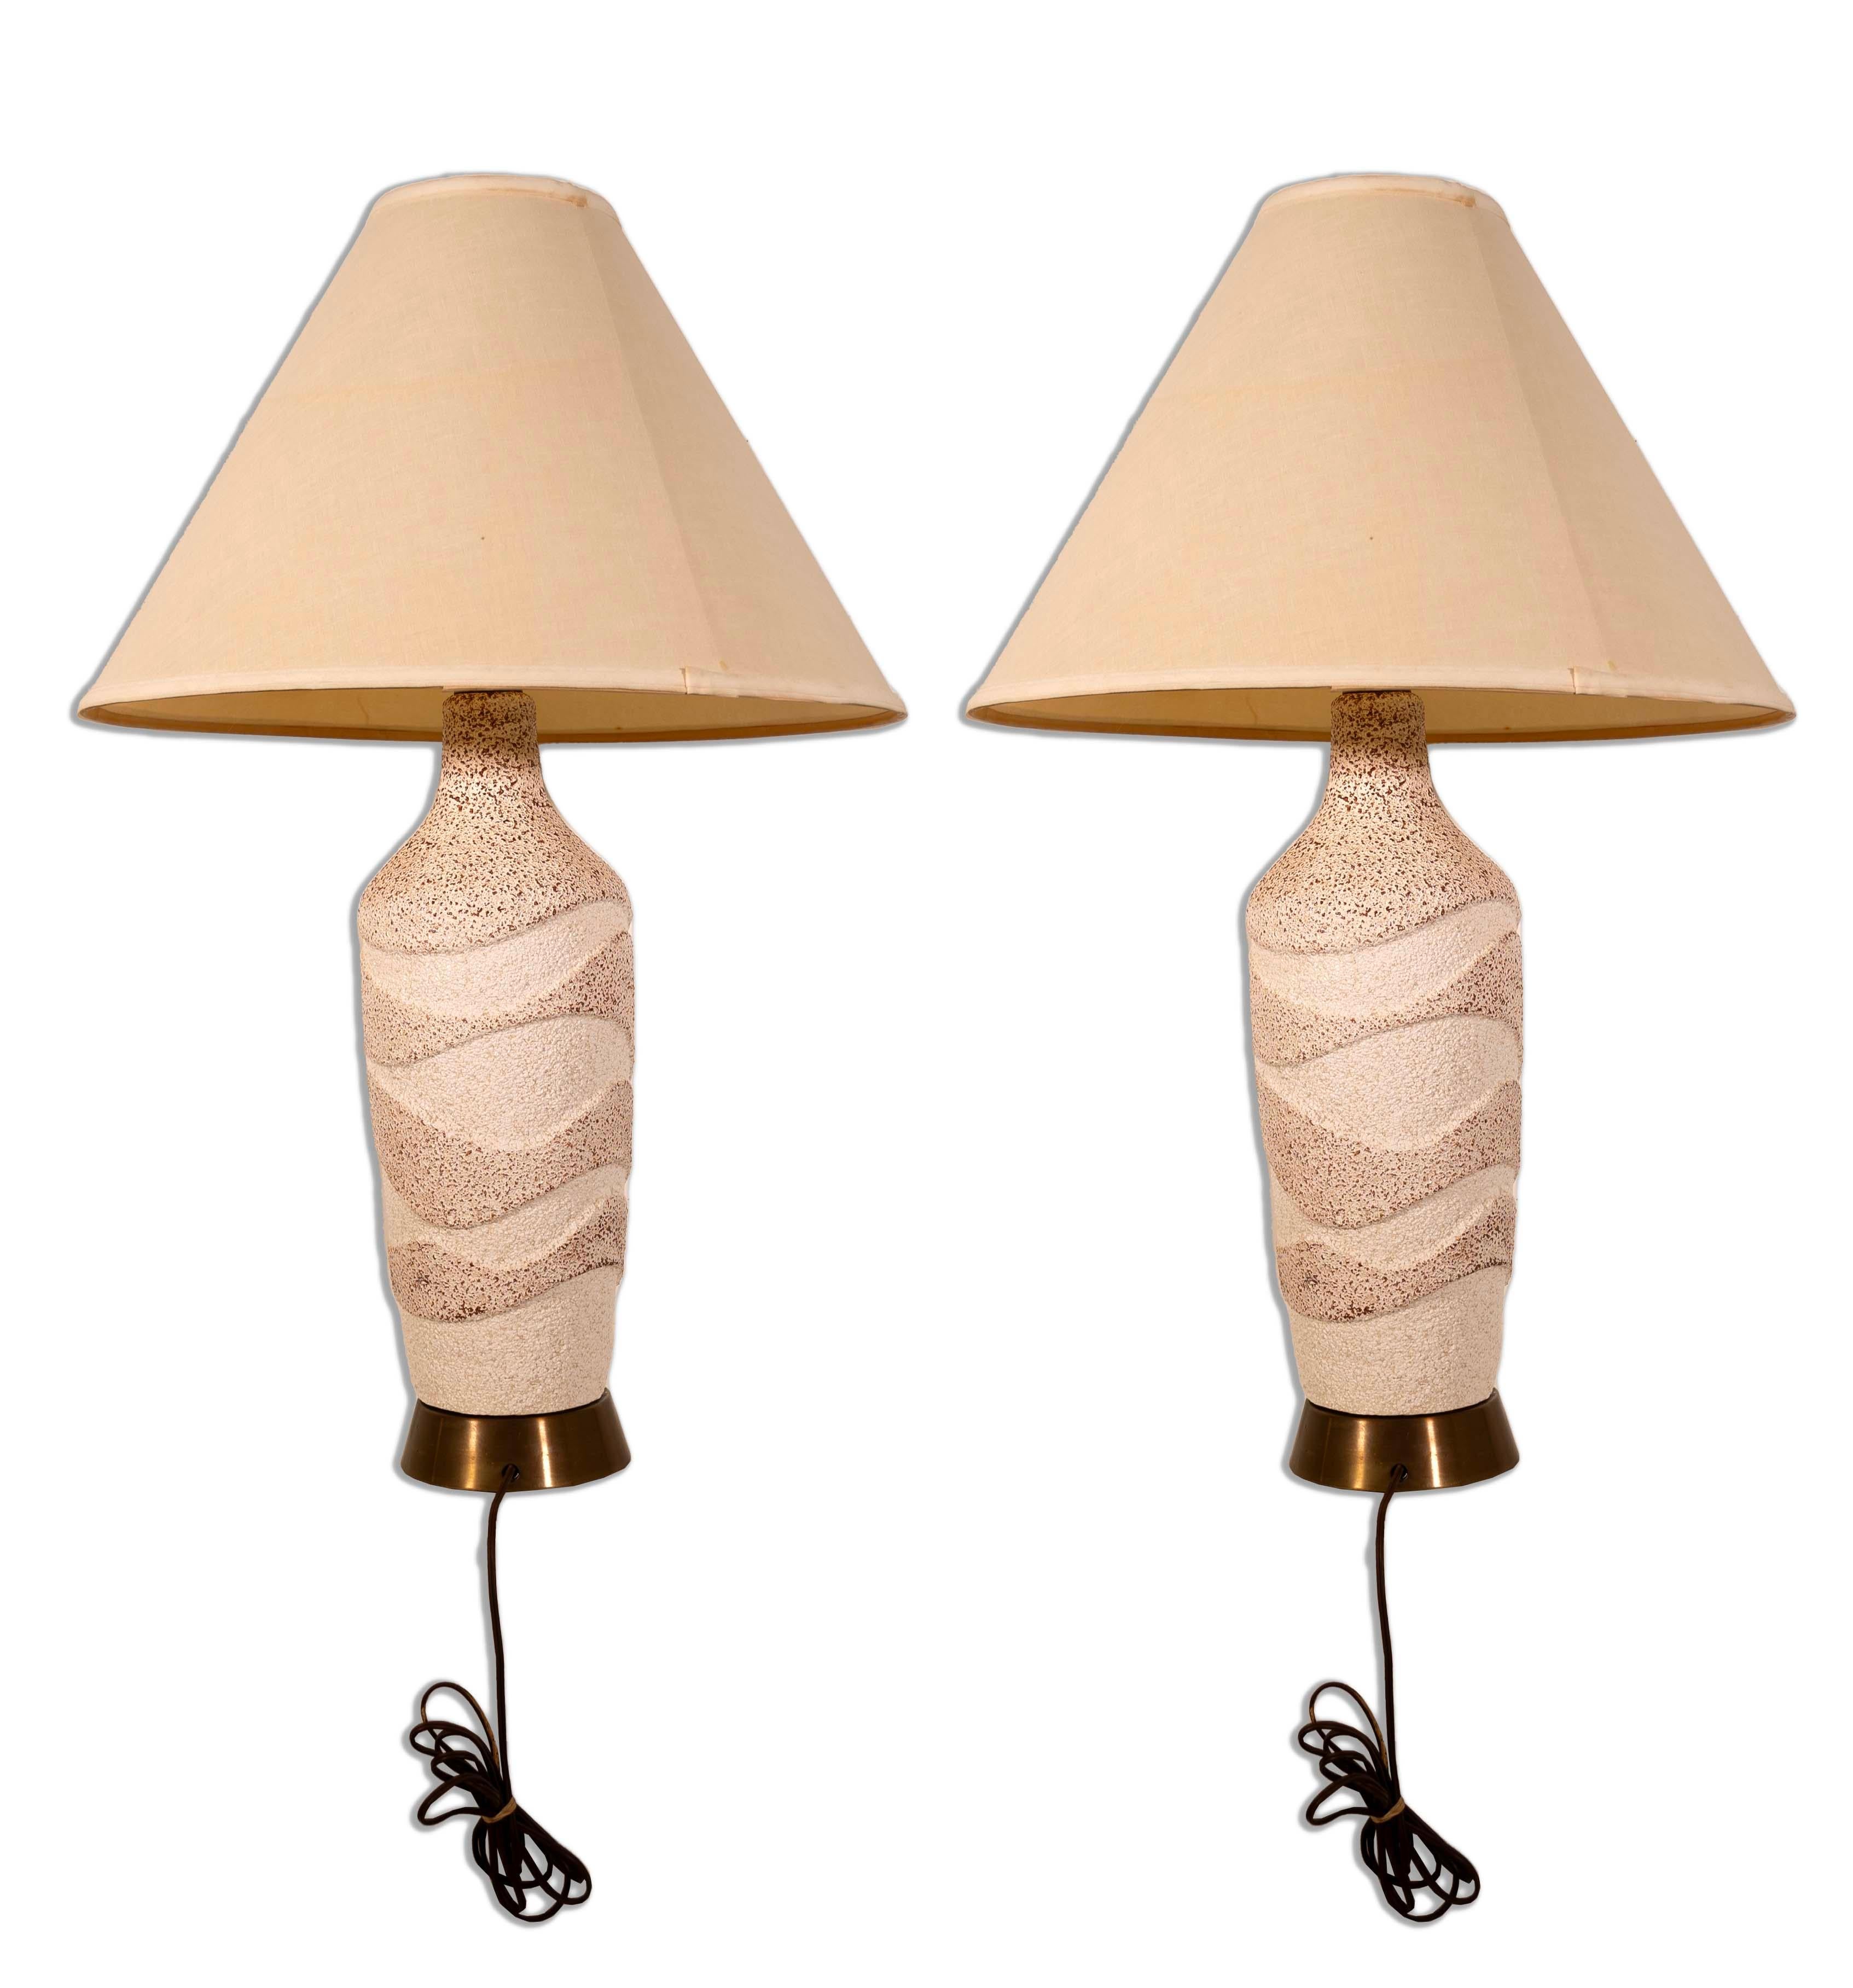 Warm and inviting, this pair of Waved Textured Ceramic Lamps is the quintessence of Mid-Century Modern charm. The unique waved design on the ceramic base, paired with the soft glow of the beige lampshades, creates an ambiance of relaxed elegance.